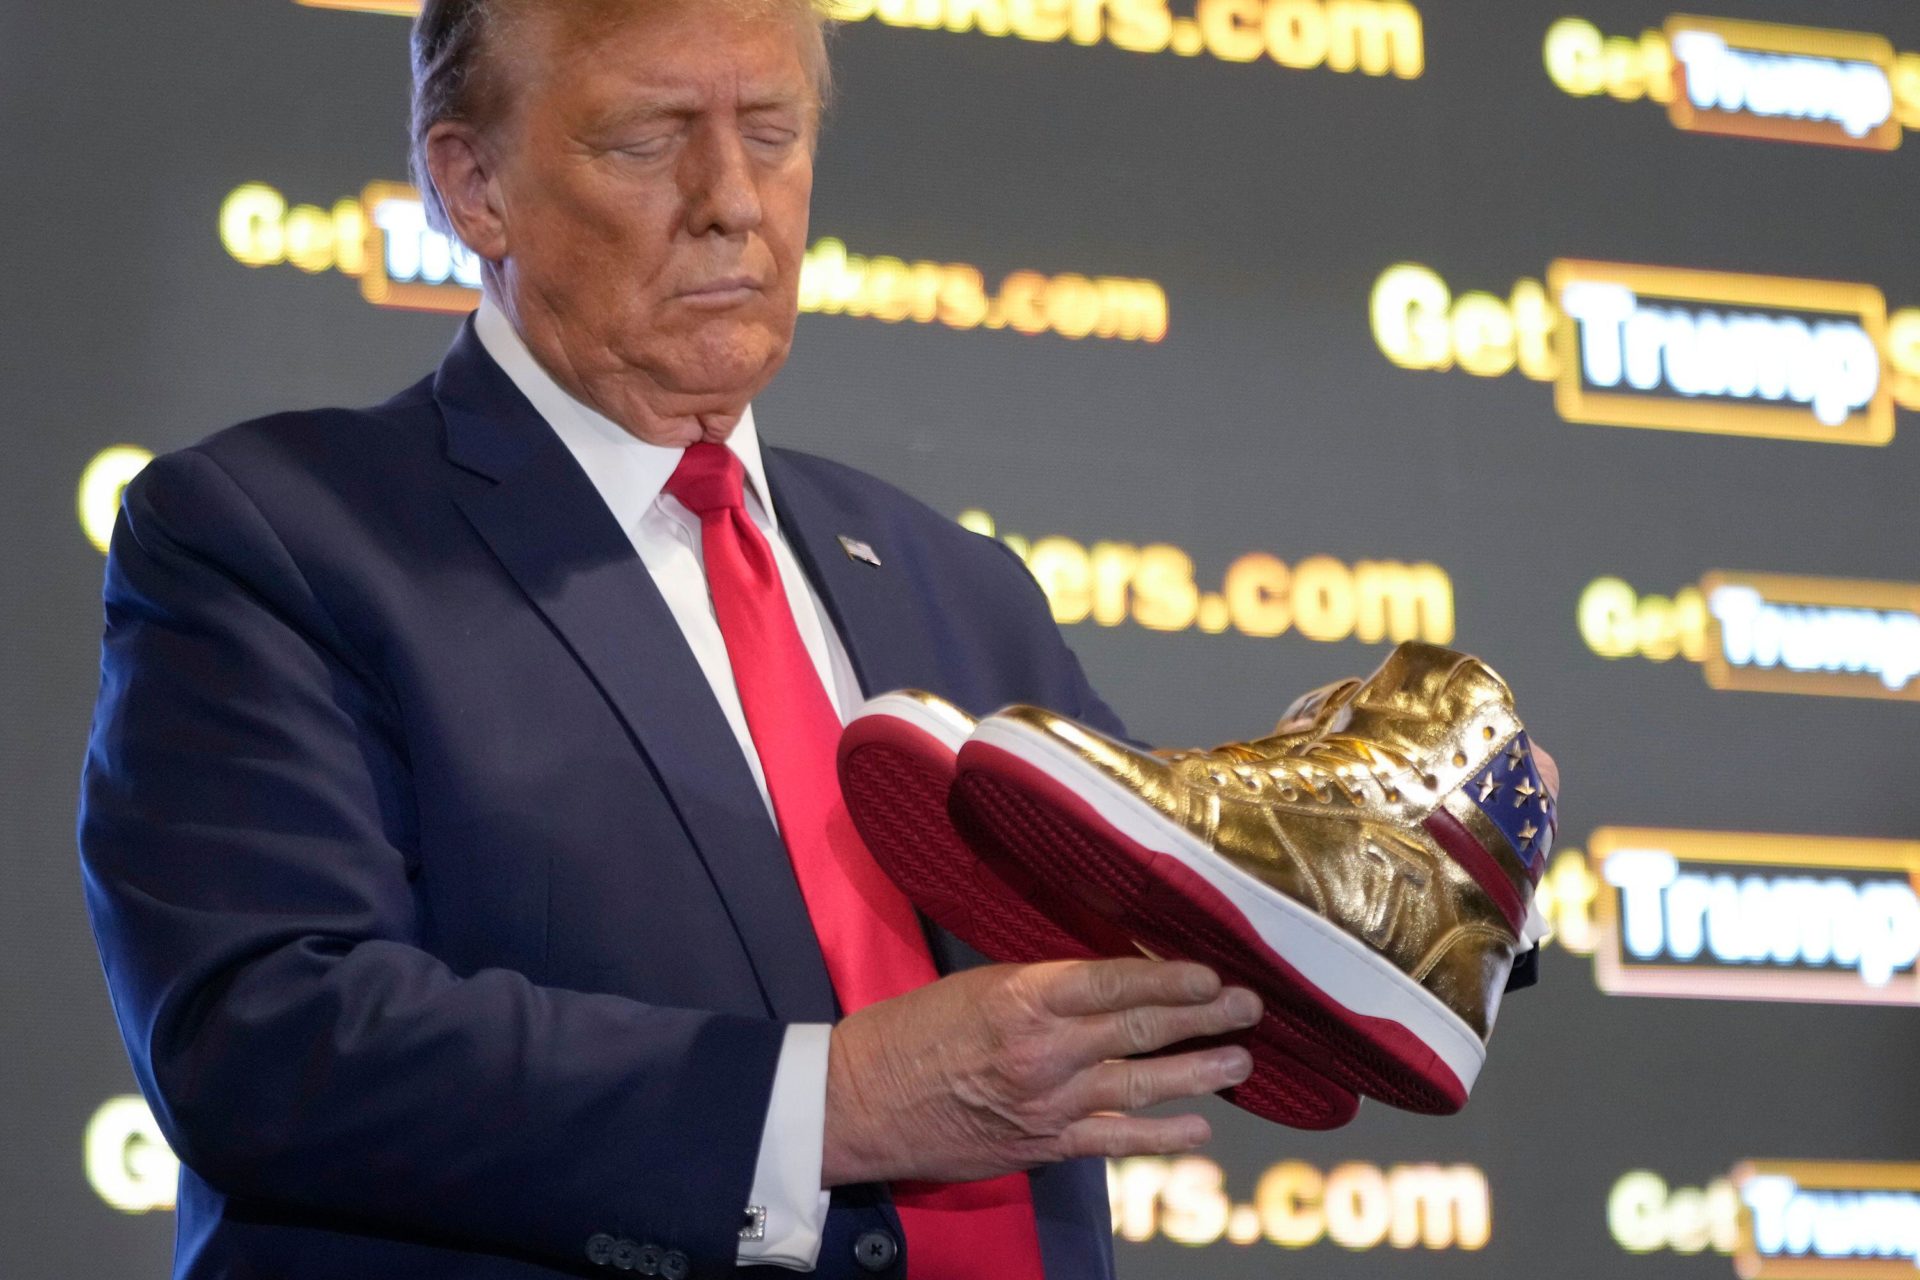 Trump sneakers: 'He needs the money, let's face it' | Newstalk